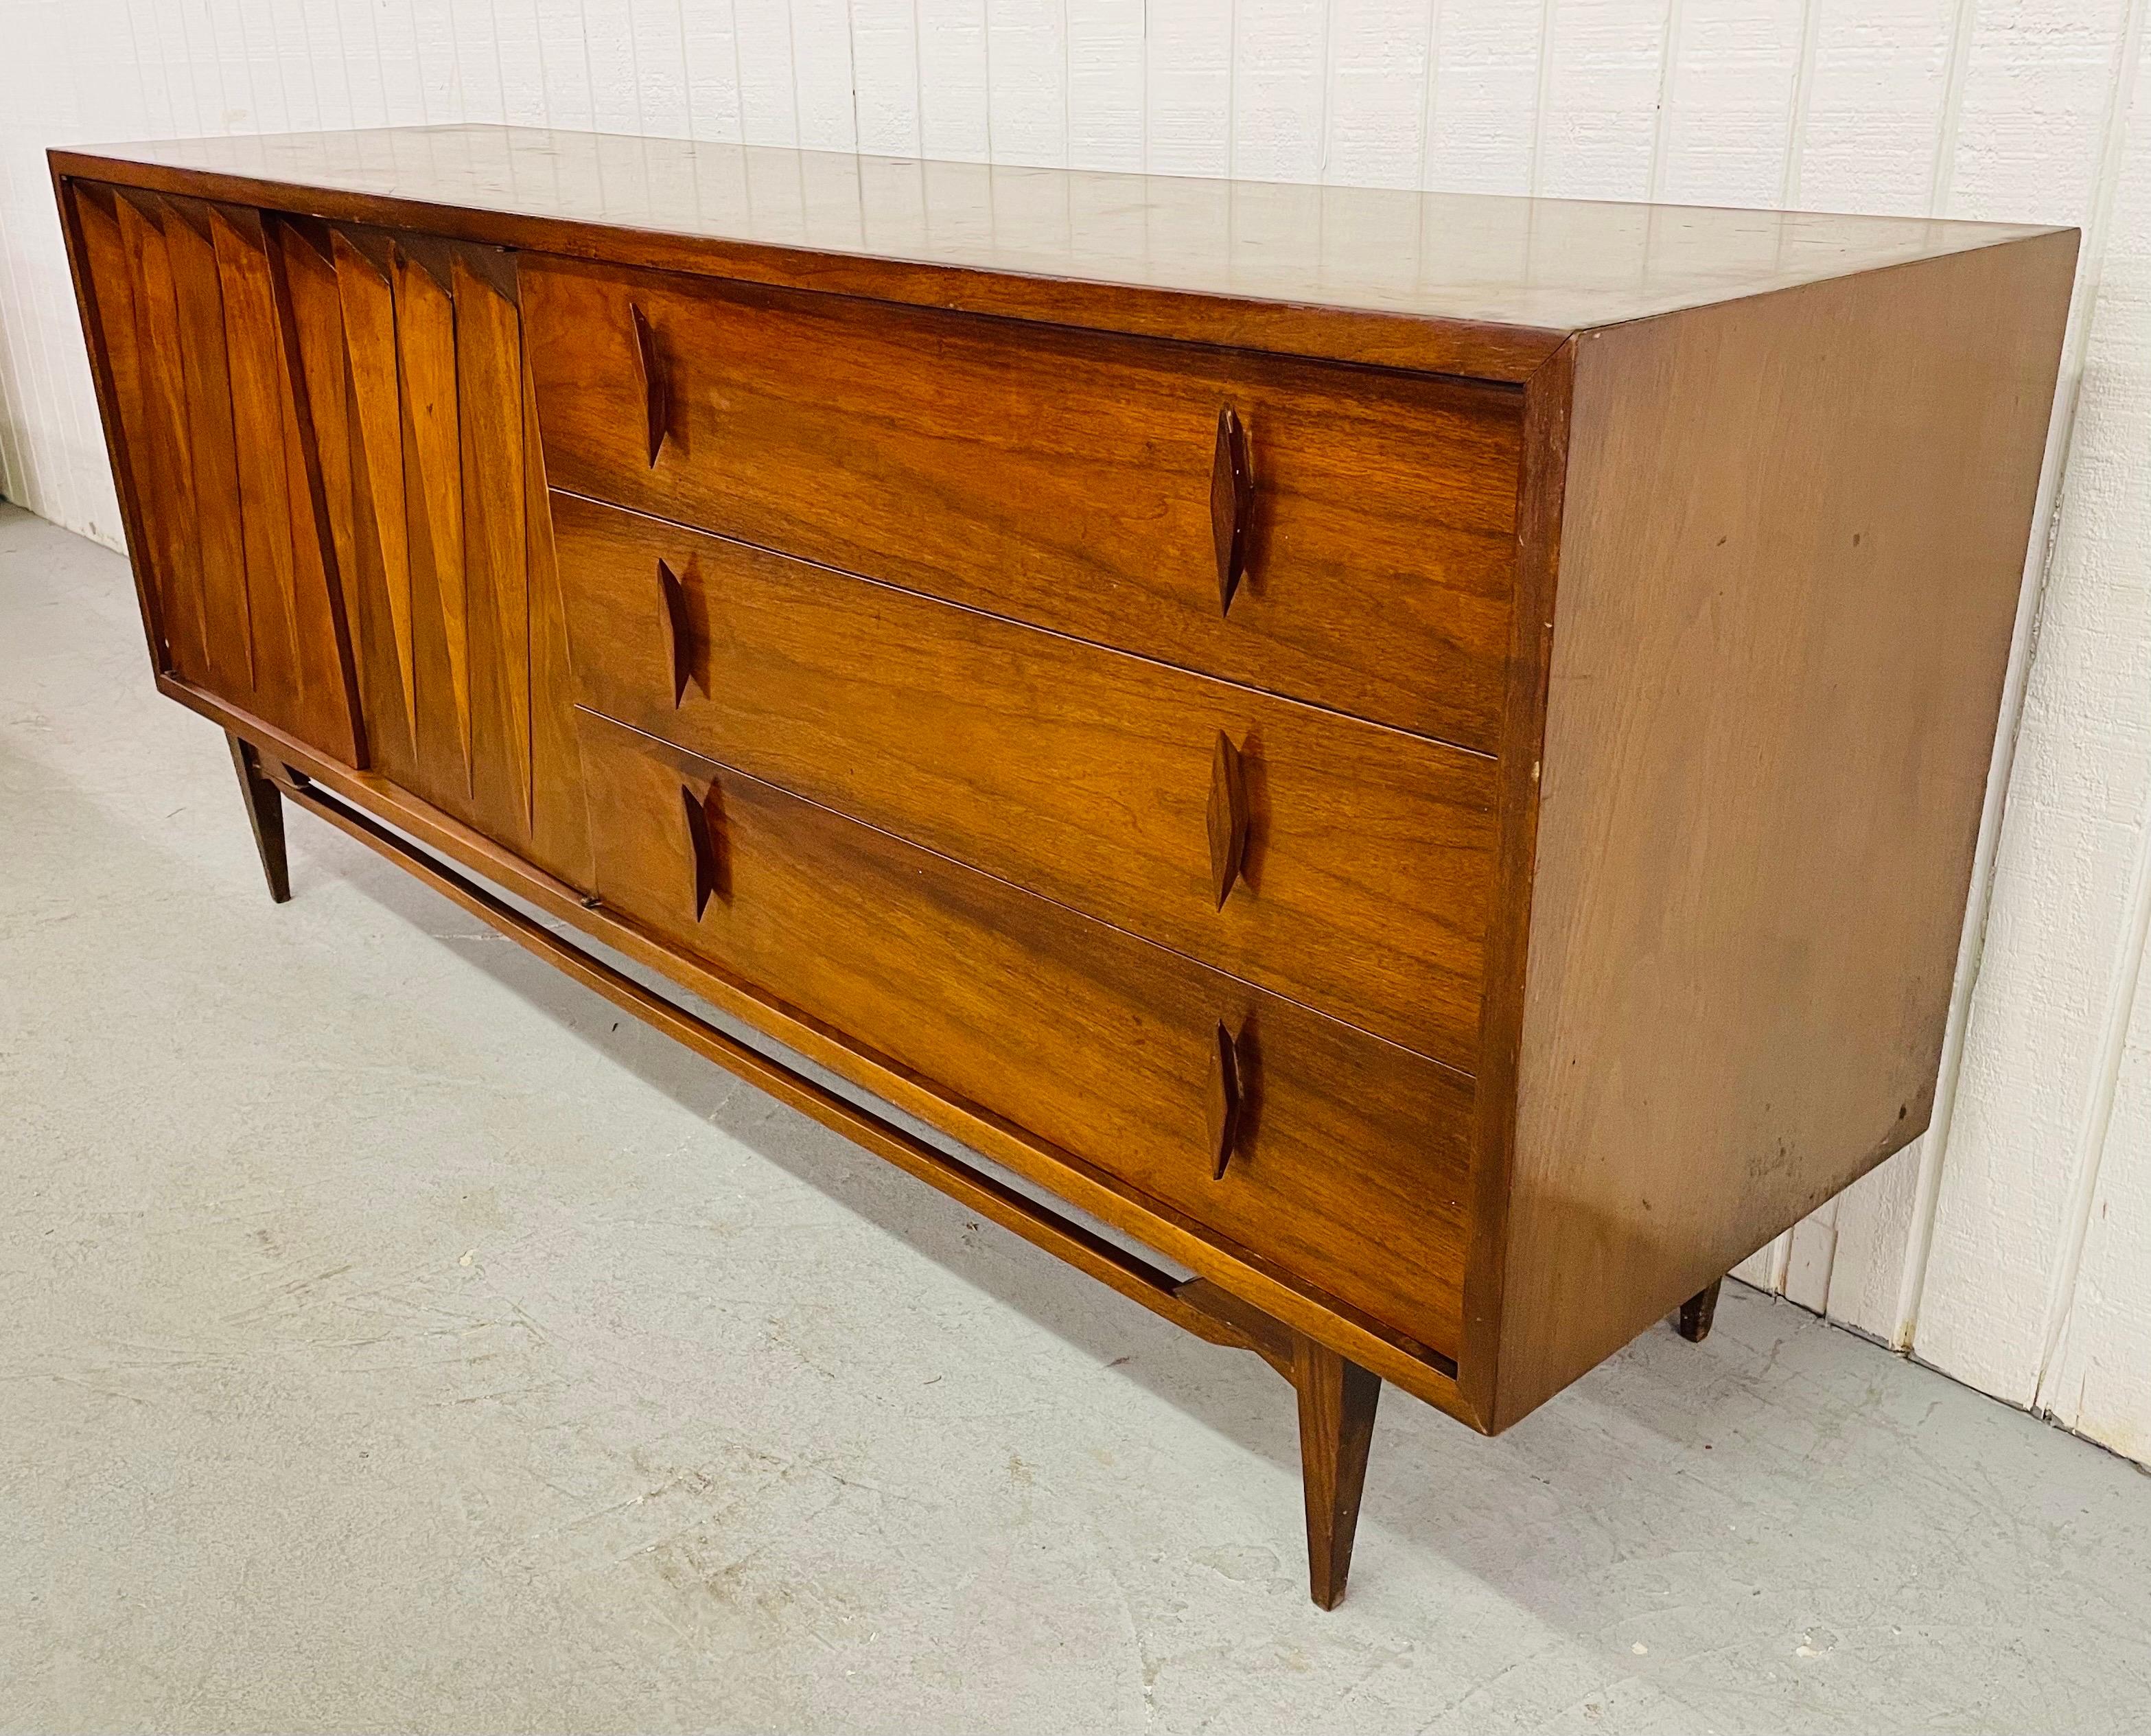 This listing is for a Mid-Century Albert Parvin Walnut Dresser. Featuring two diamond shaped doors on the left that open up to three hidden drawers, three drawers on the right with original diamond shaped walnut pulls, and a beautiful walnut finish.